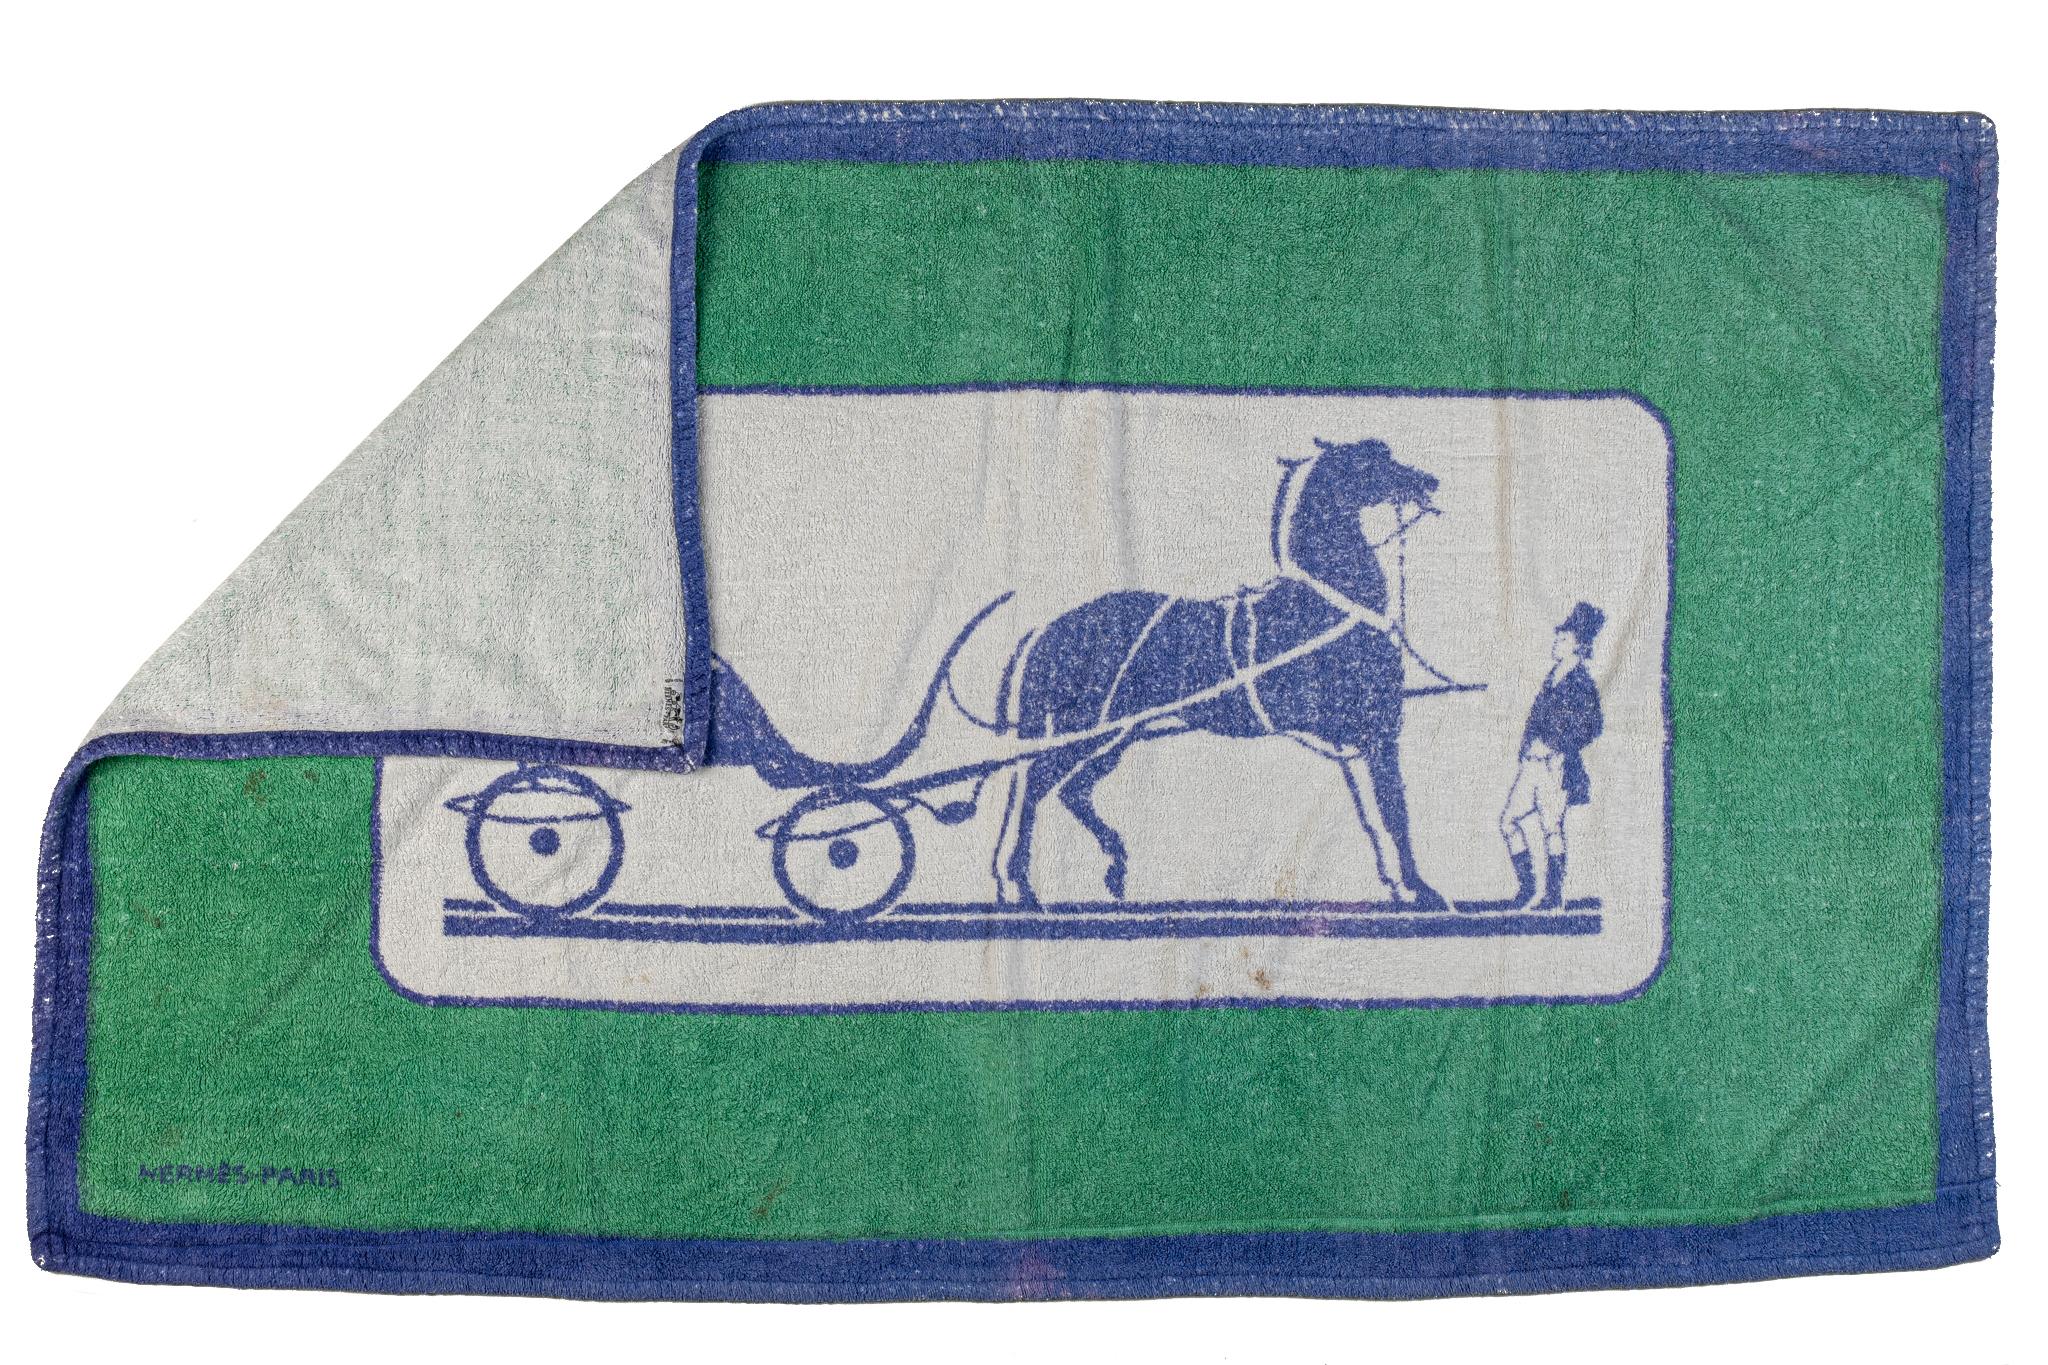 Hermes vintage carriage beach towel. Blue, green and white combination. Please refer to photo for 2 stains.